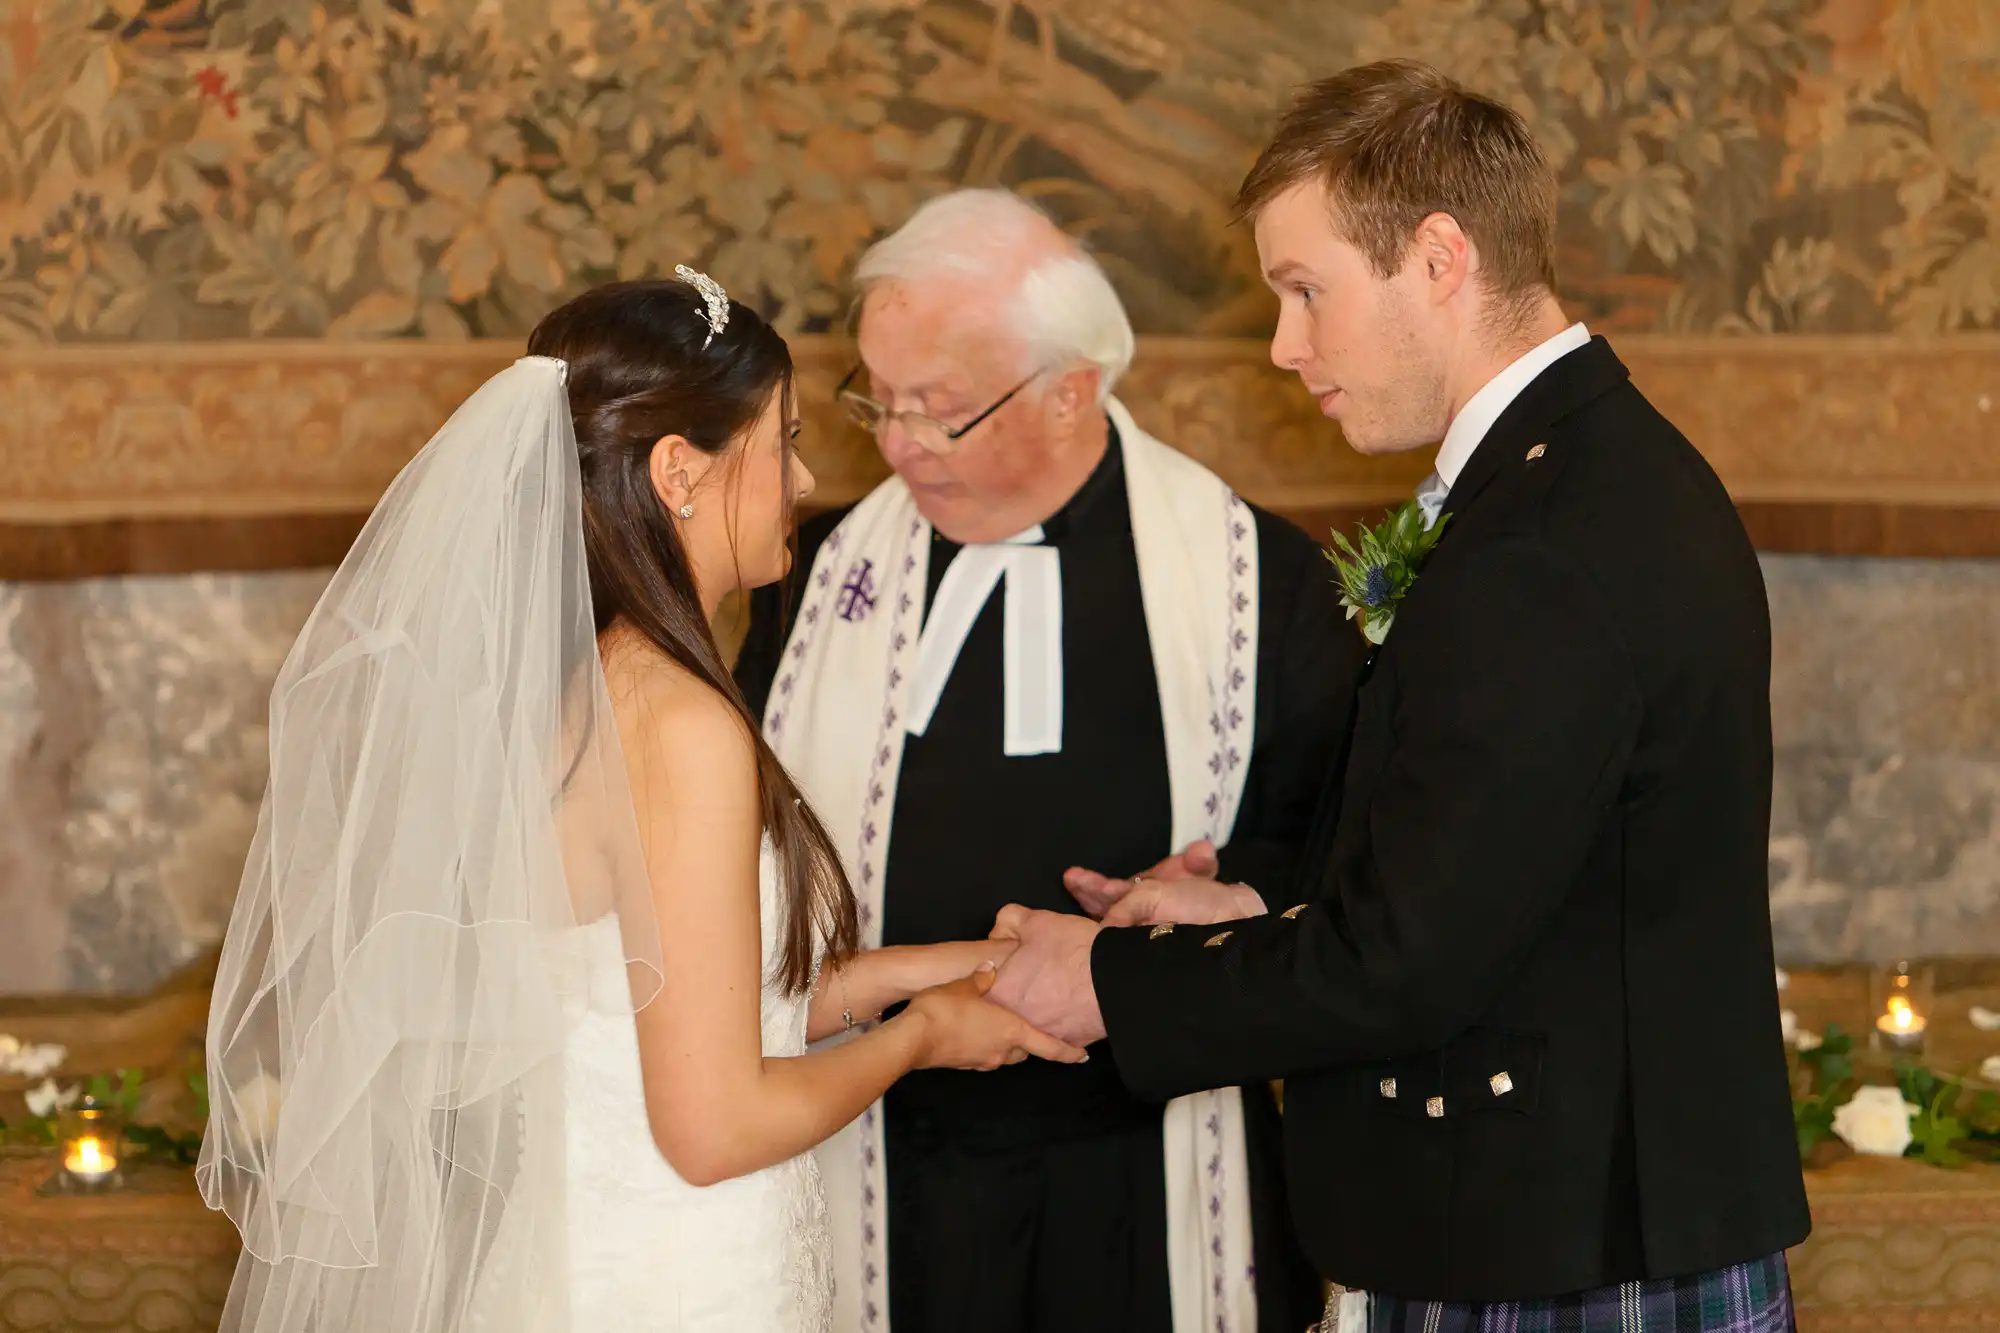 A bride and groom exchanging rings during a wedding ceremony, officiated by a priest, in a room with a mural in the background.